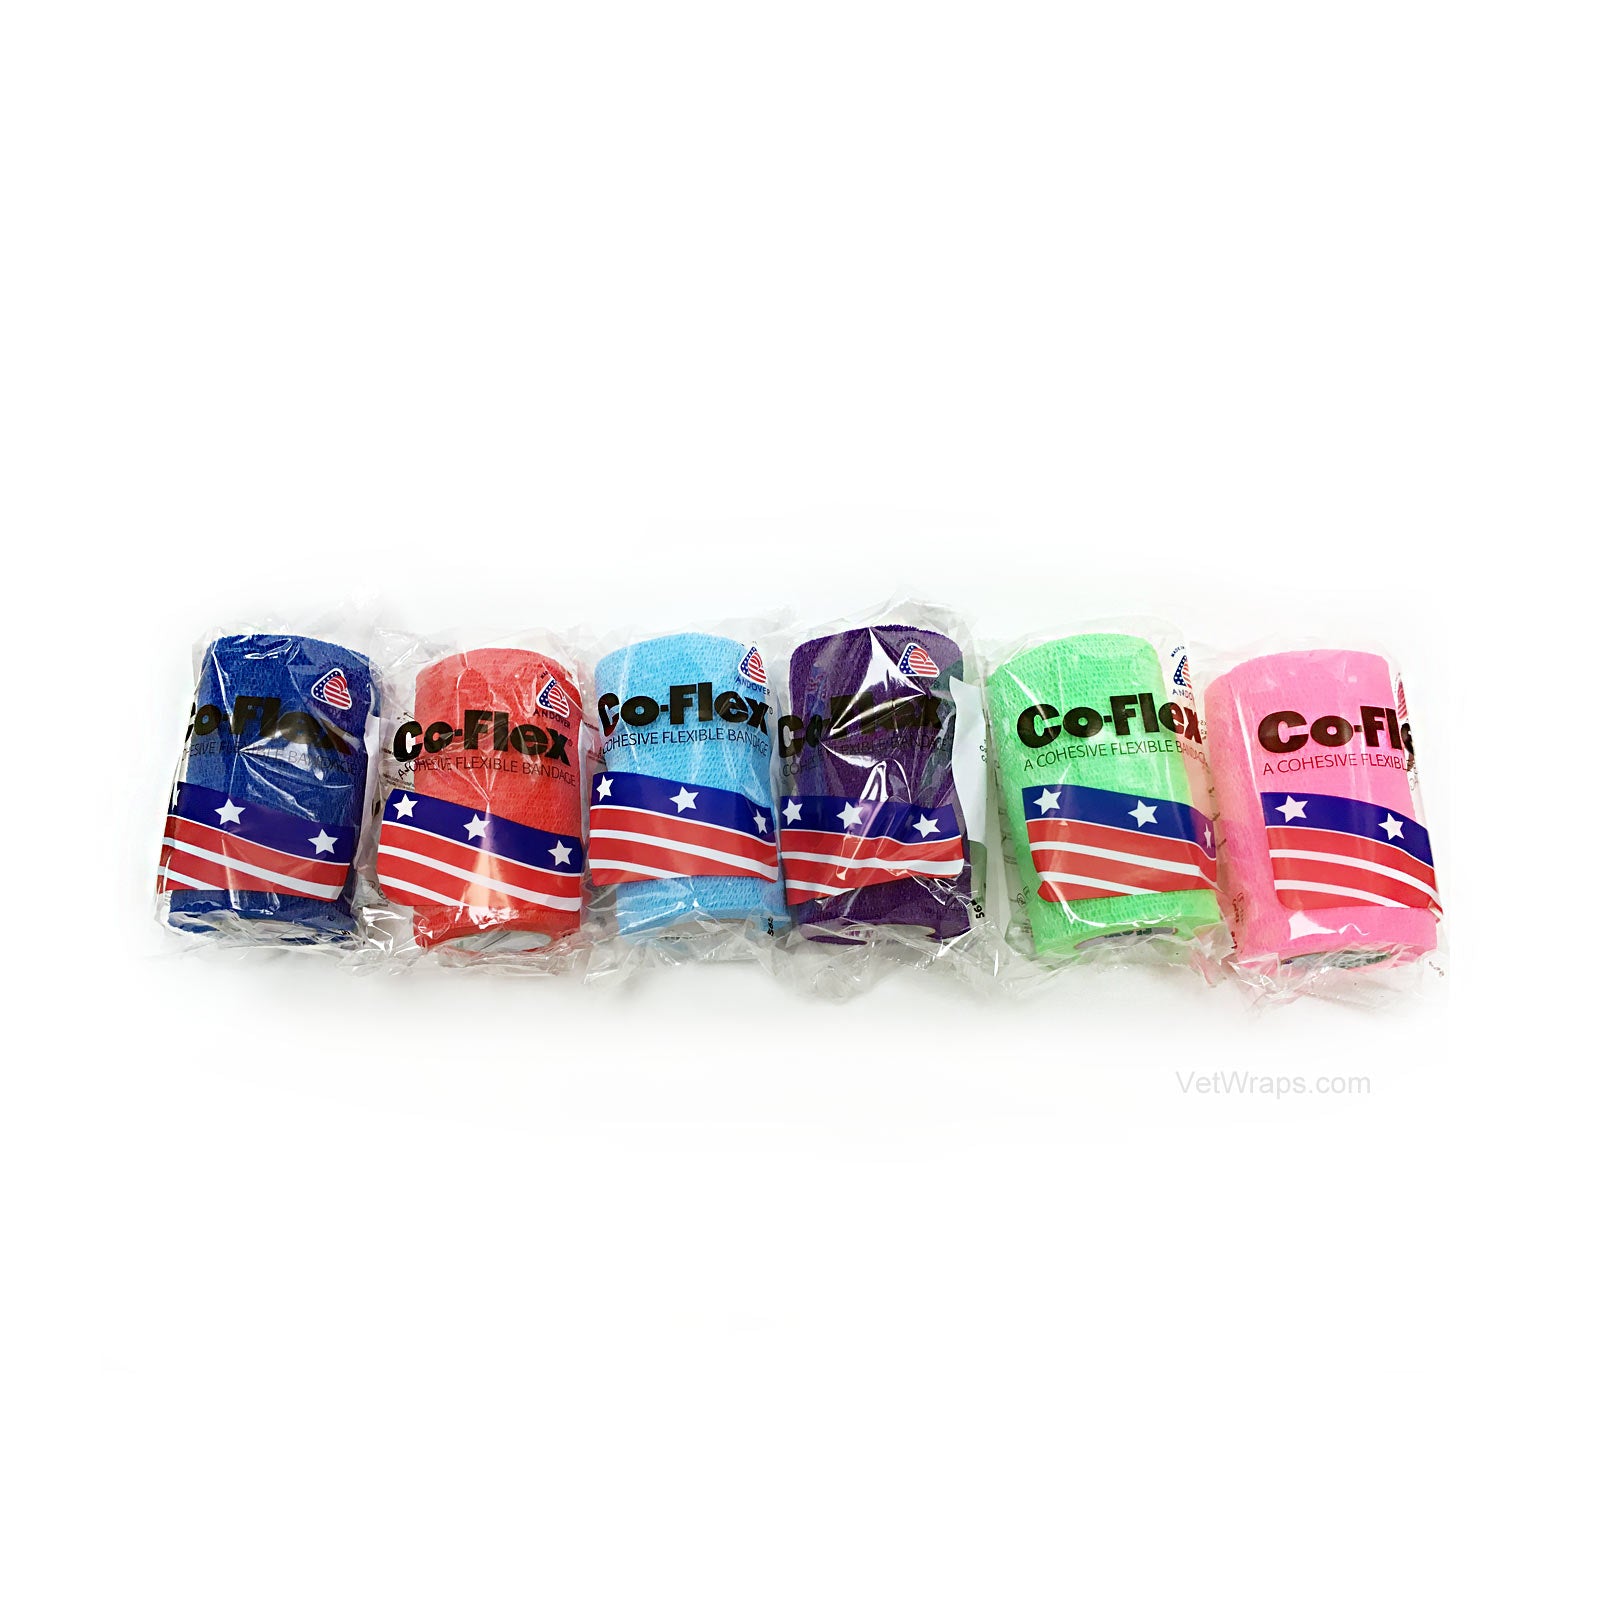 Andover CoFlex Vet Cohesive Bandage Color Pack (neon pink, blue, purple, light blue, neon green, red rolls in packages).